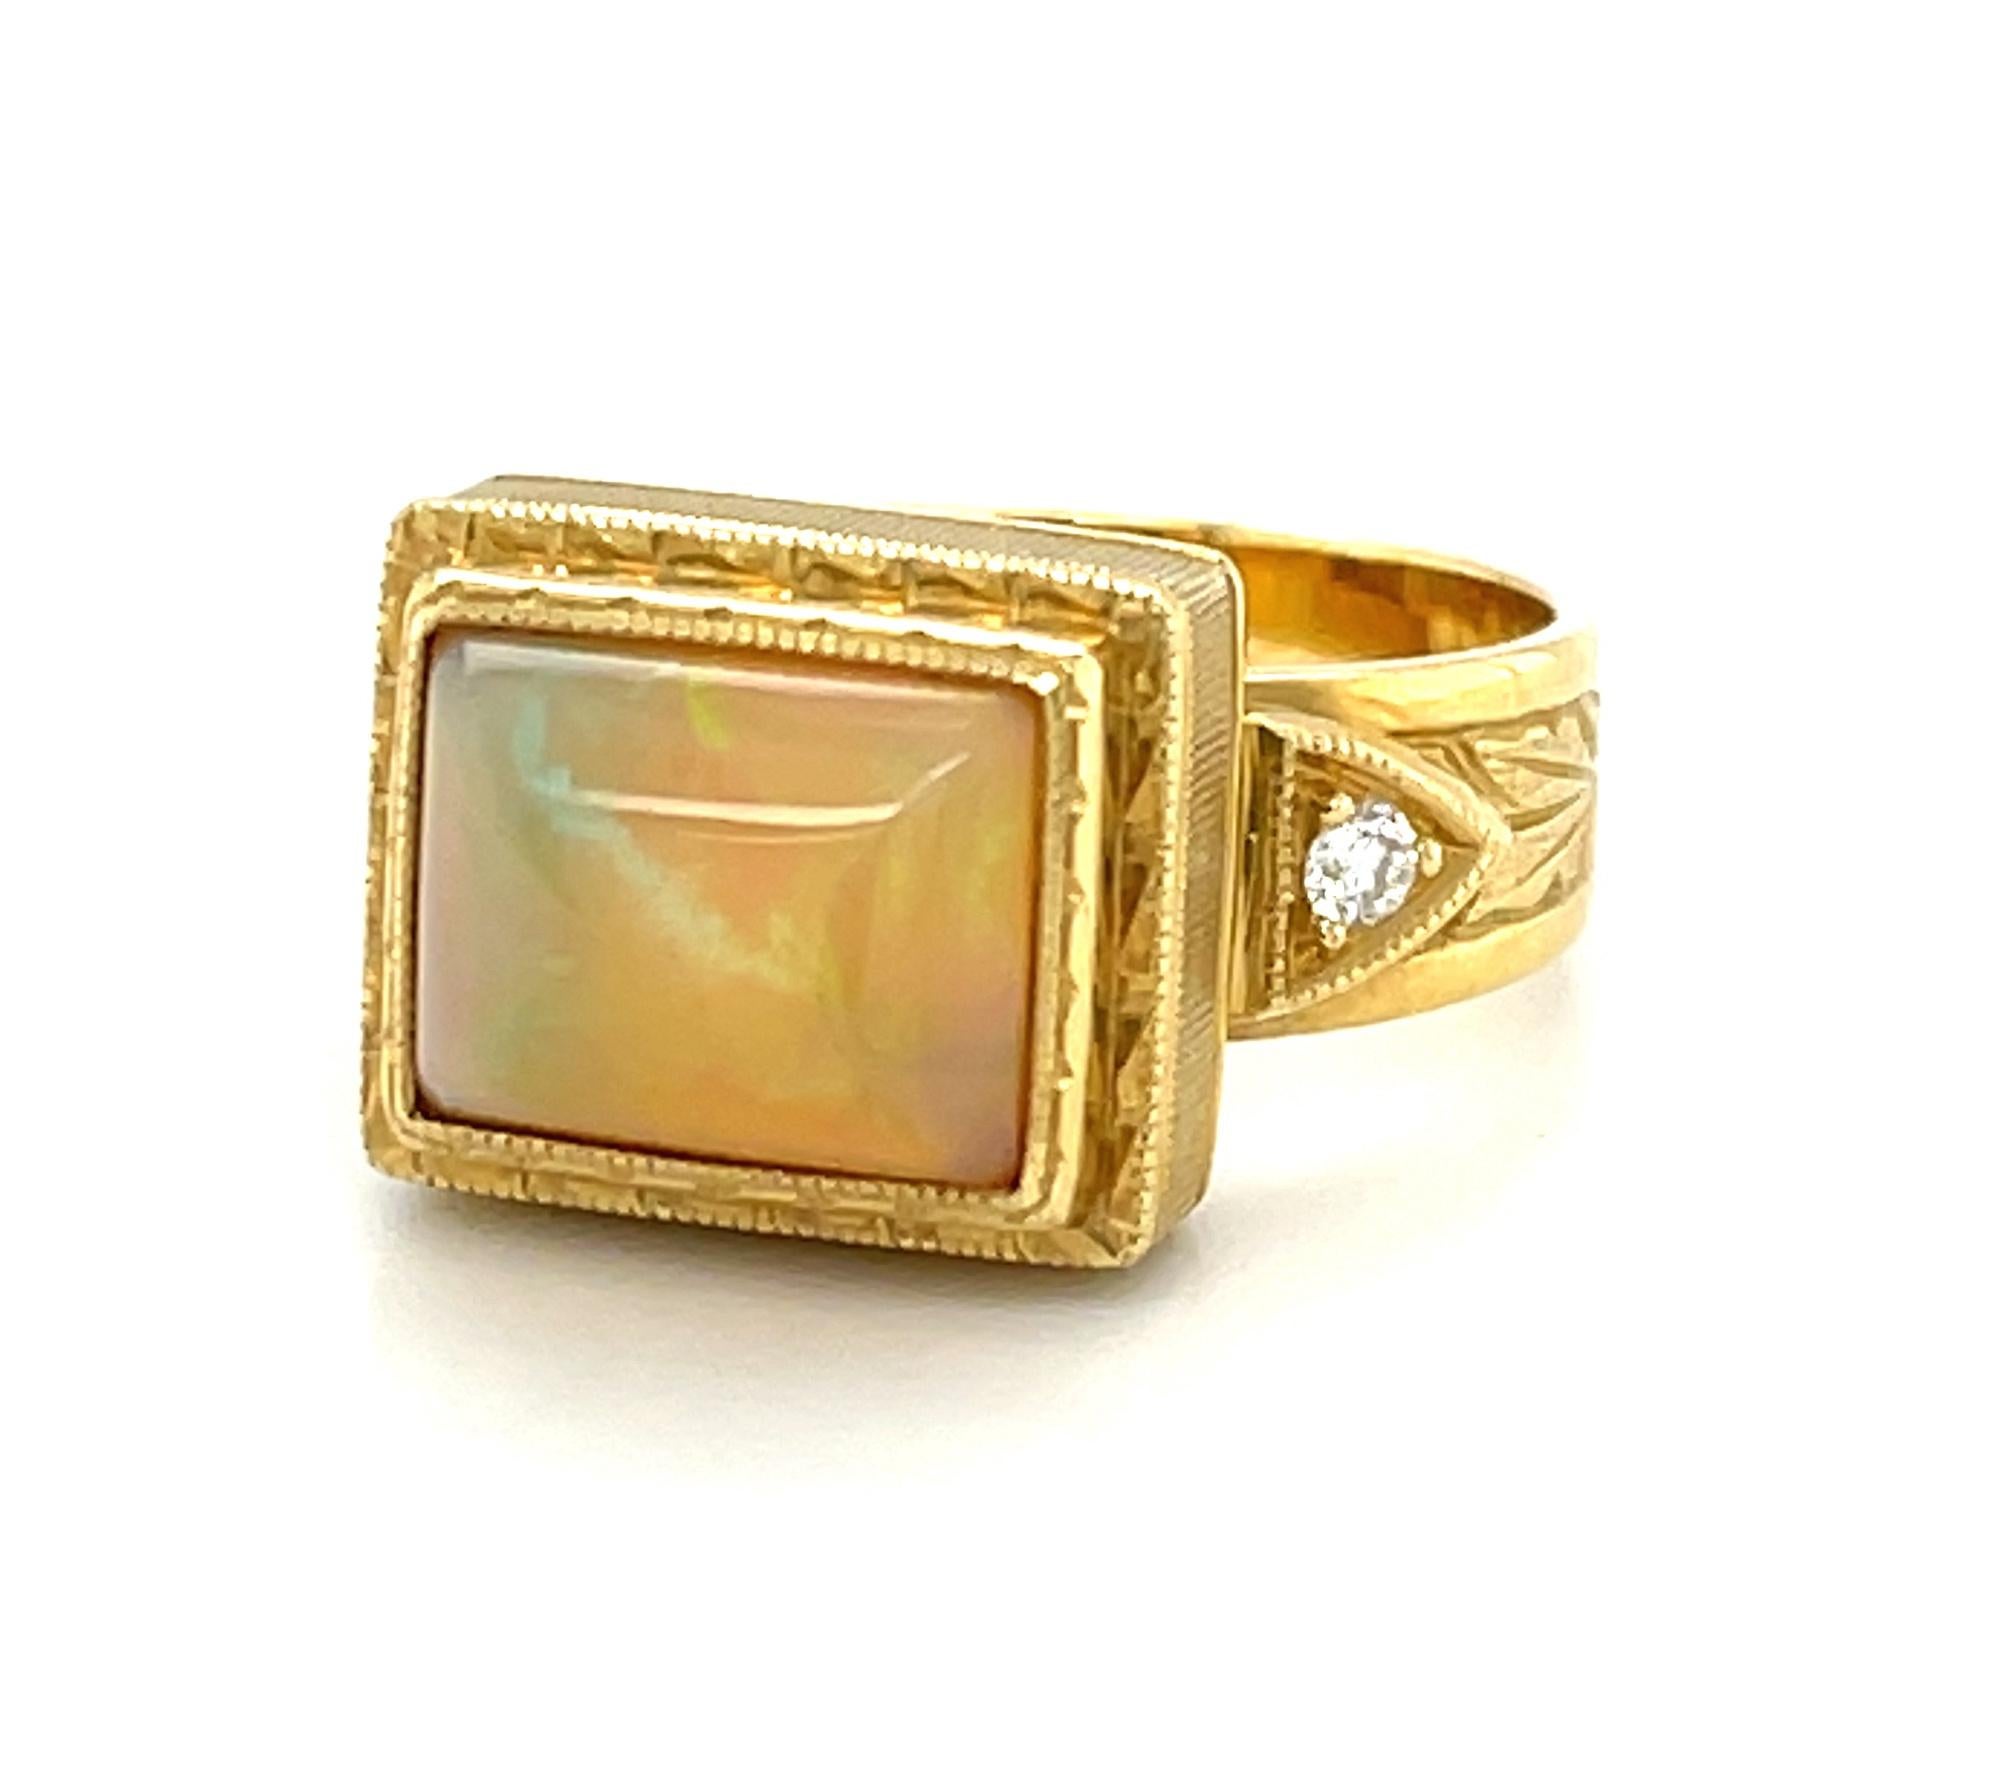  2.14 Carat Opal Cushion and Diamond Hand-Engraved Band Ring in 18k Yellow Gold  In New Condition For Sale In Los Angeles, CA